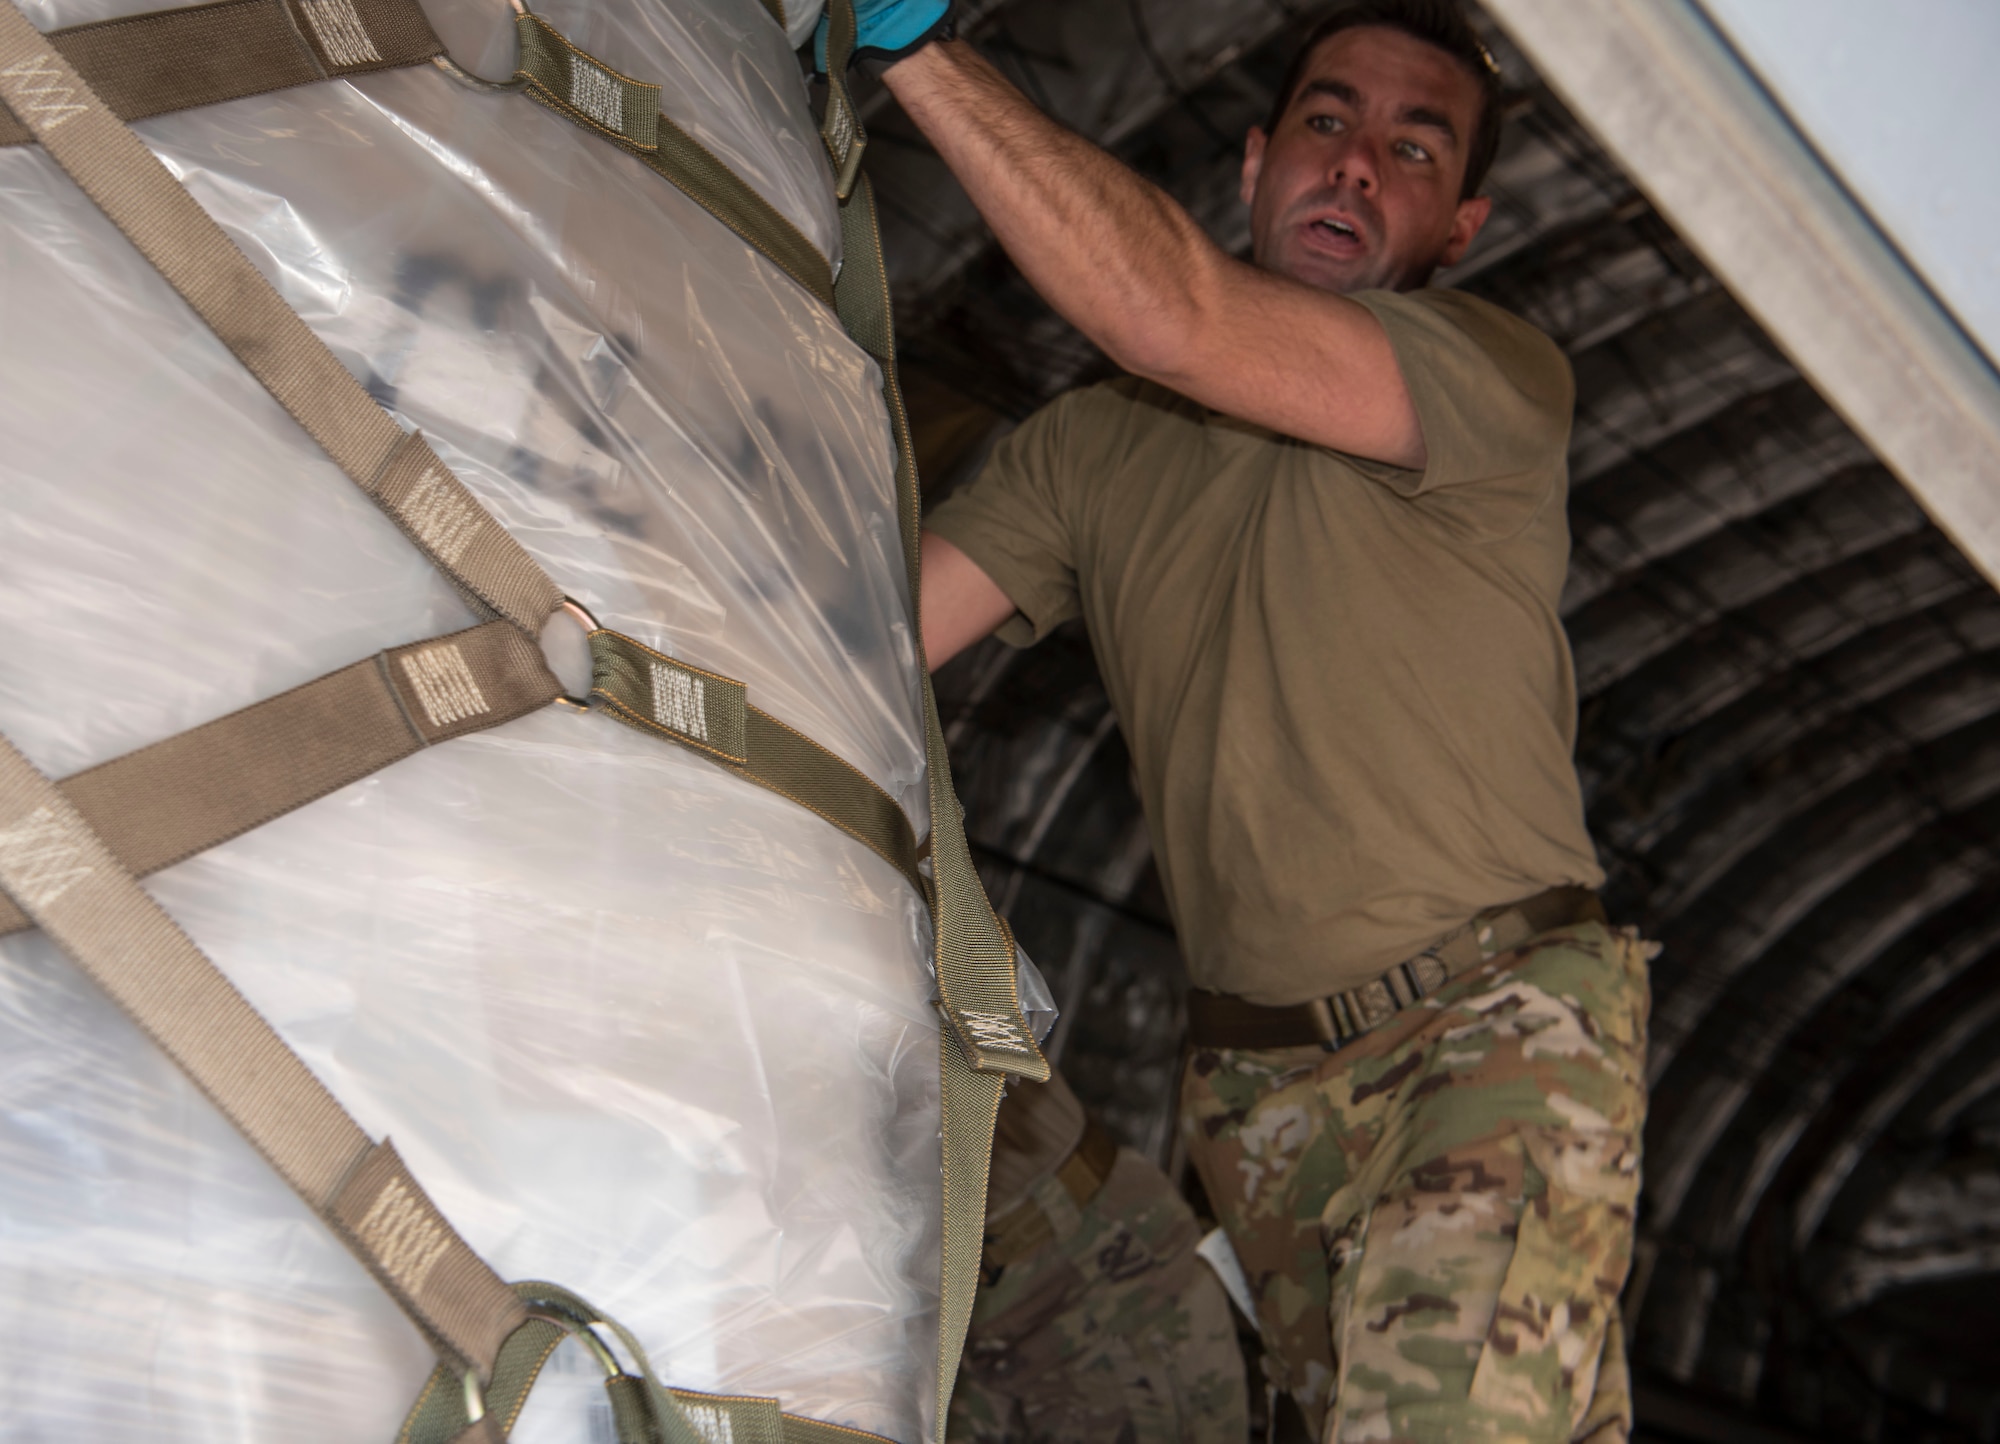 Master Sgt. Javier Lopez, loadmaster with Joint Base Charleston's Air Force Reserve 317th Airlift Squadron, offloads palletized medical supplies and food from the rear of a C-17 Globemaster III cargo aircraft at Soto Cano Air Base, Honduras, Feb. 13, 2022.  The cargo was donated by charities within the U.S. and was transported as part of the Denton Cargo Program, which allows for humanitarian goods to be transported aboard U.S. military aircraft on a space-available basis. (U.S. Air Force photo by Lt. Col. Wayne Capps)